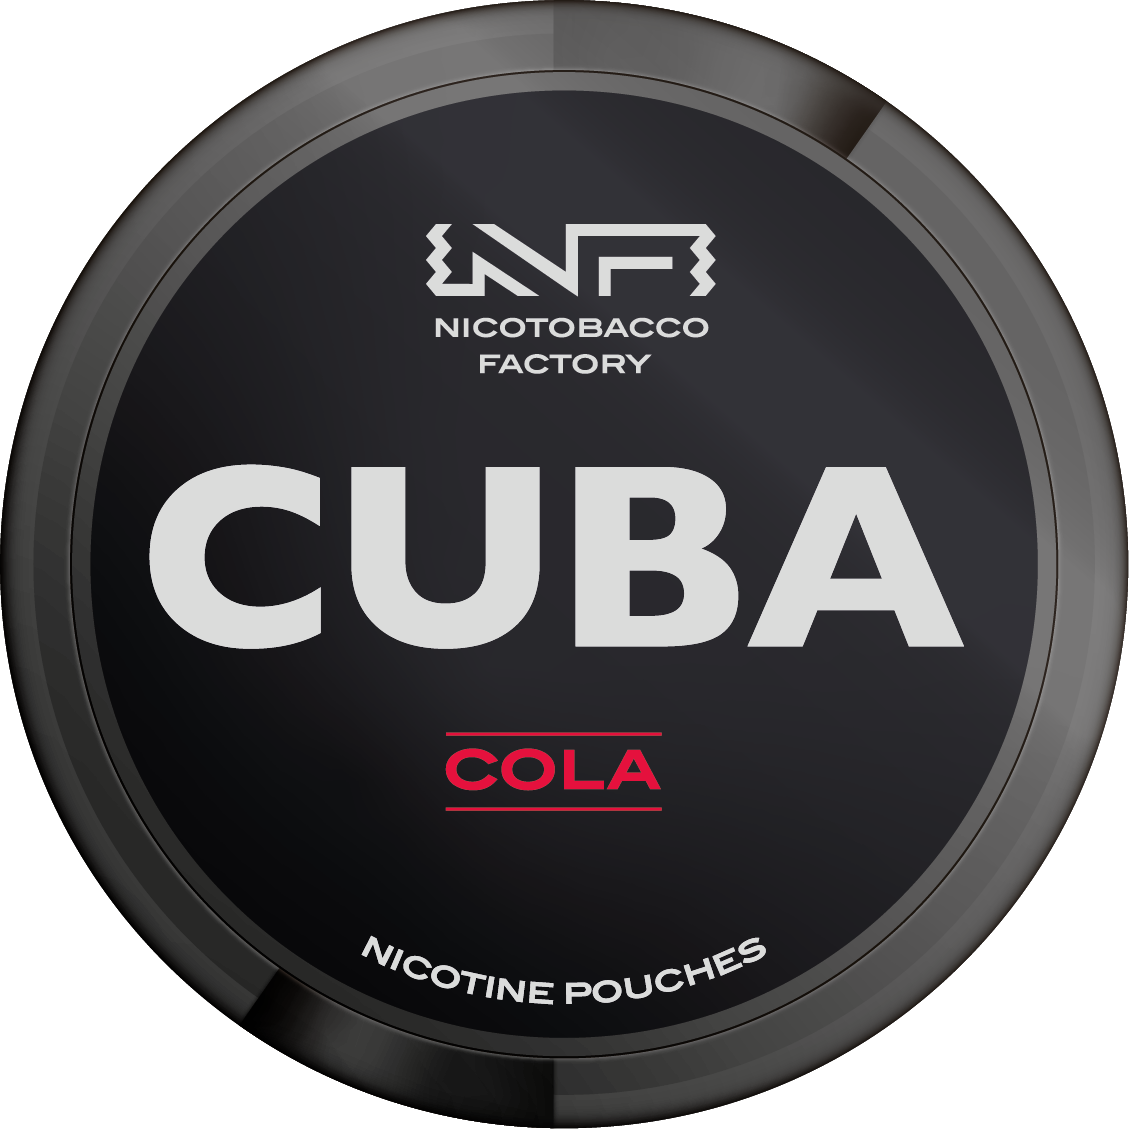 Black Cola Nicotine Pouches By Cuba